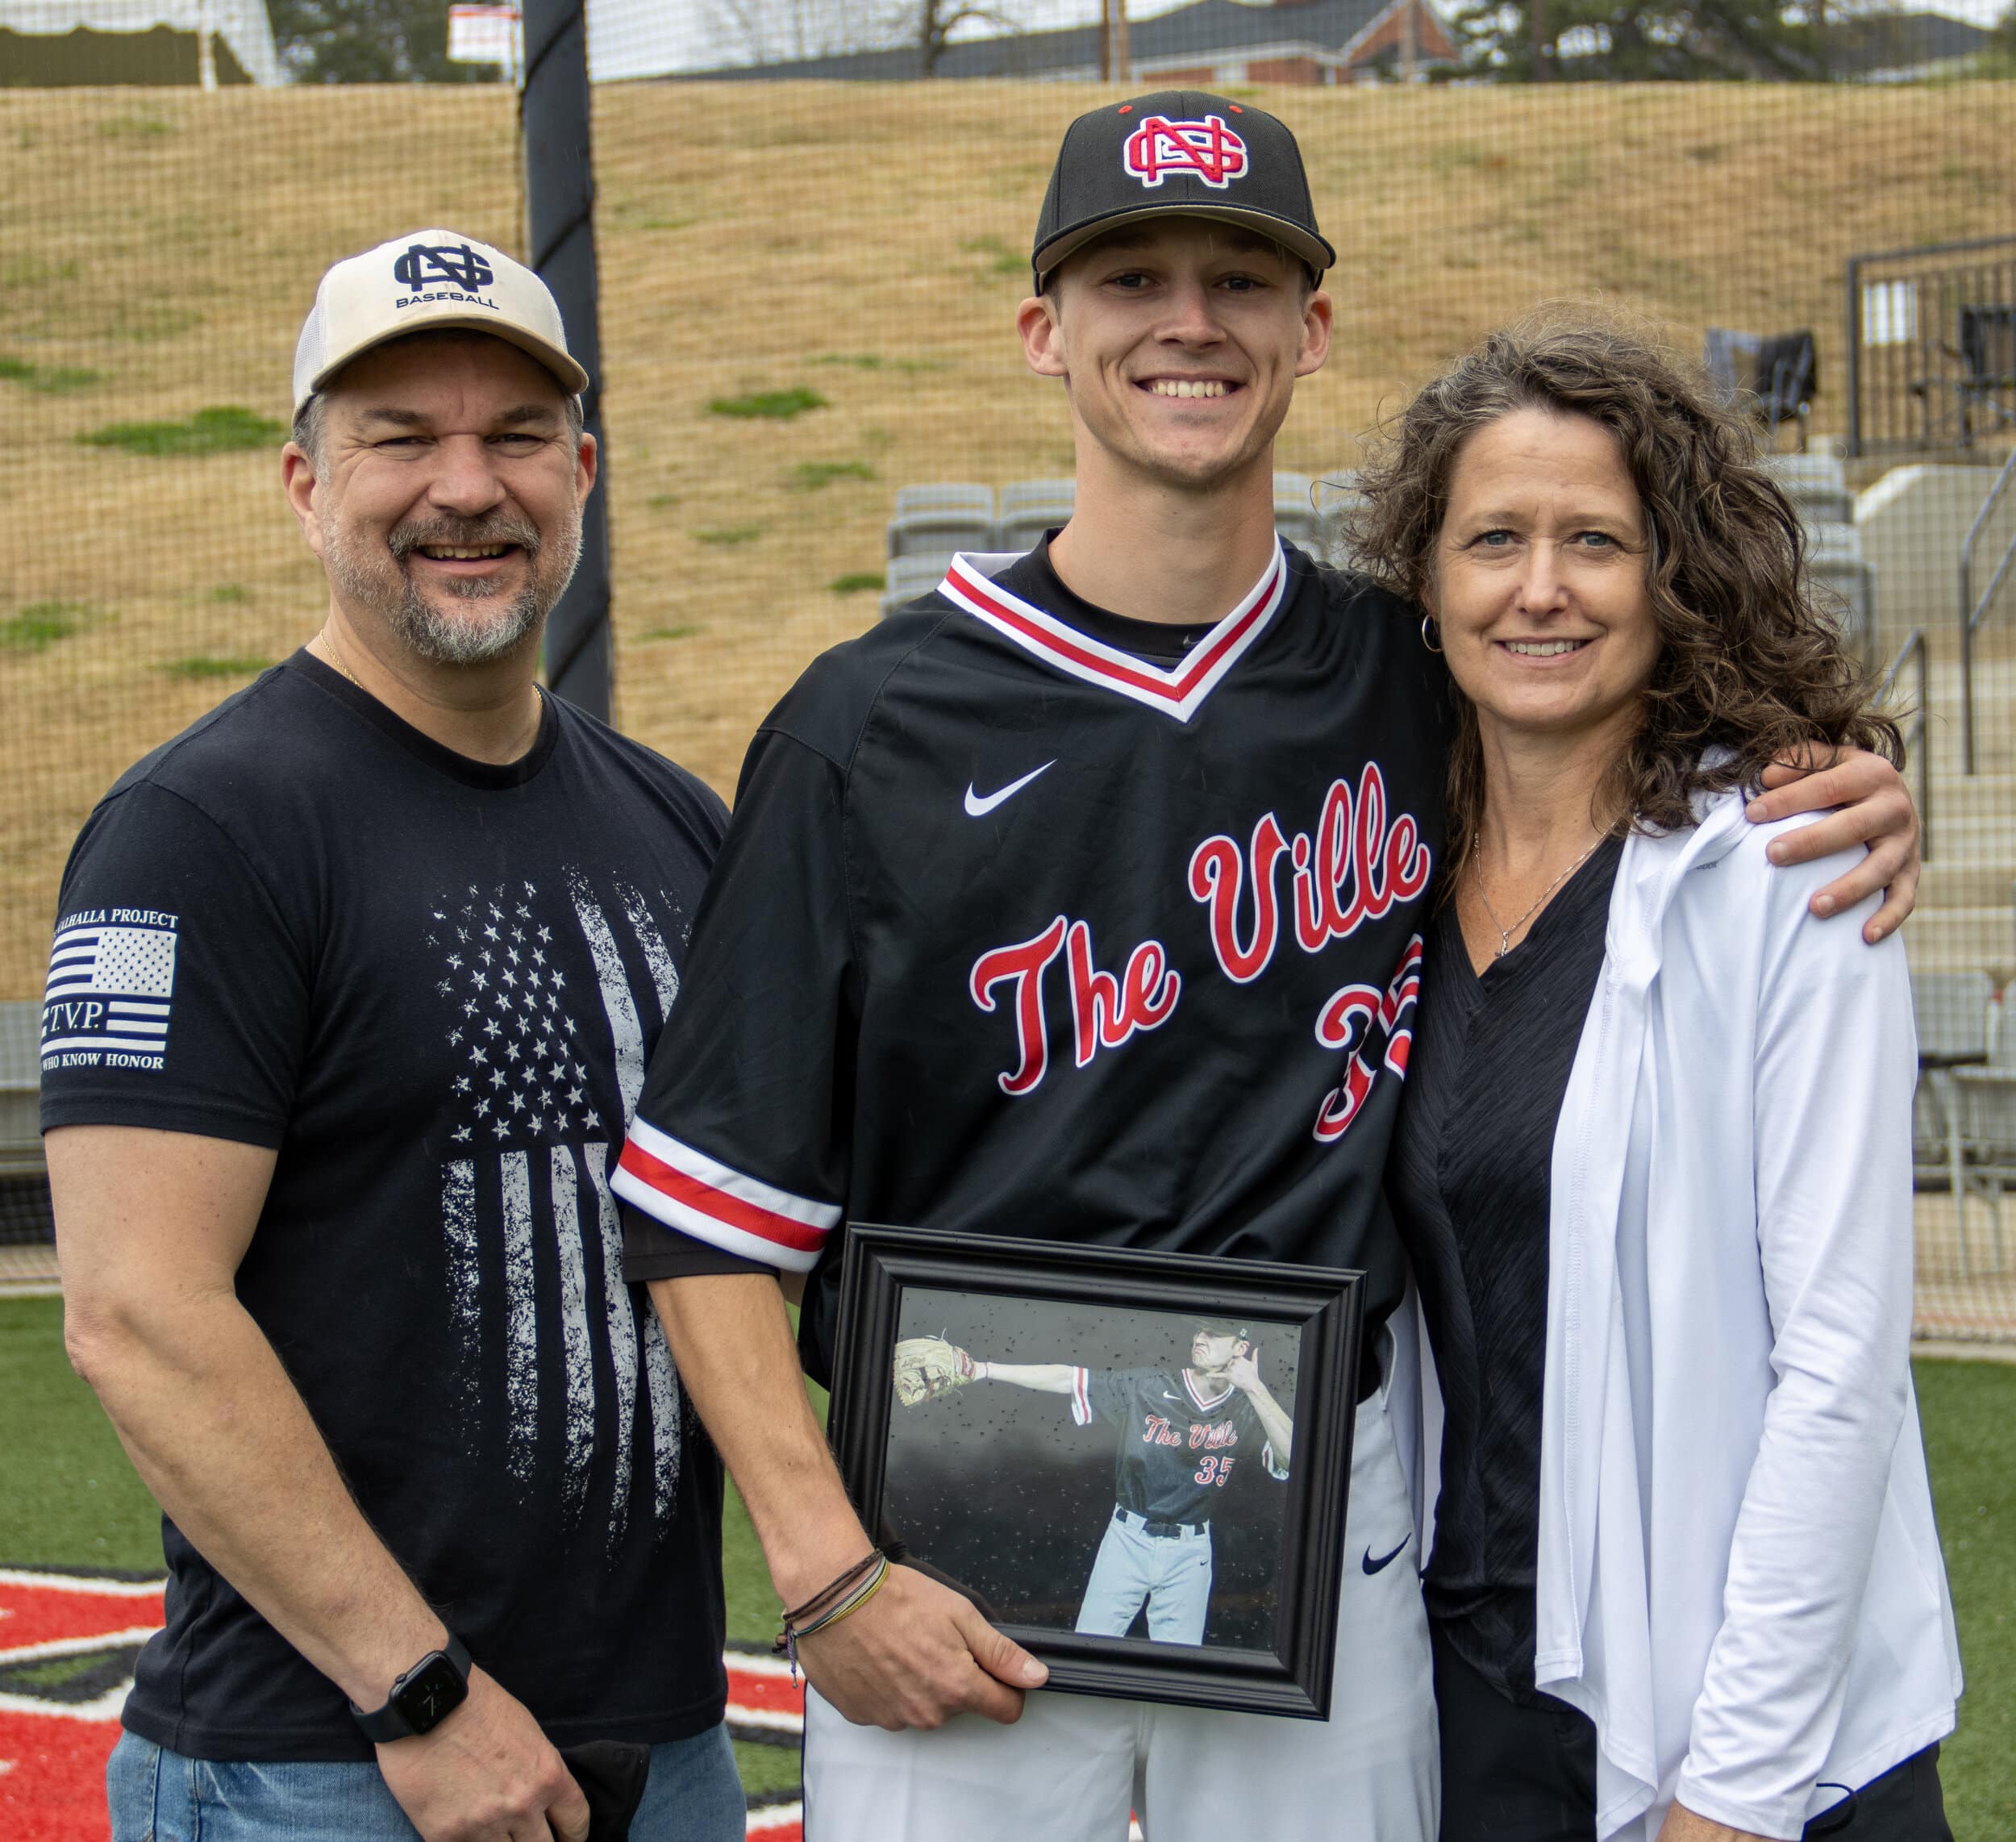 Pitcher Matthew Dailey, known as Dimes by his teammates, poses after the senior day ceremony.